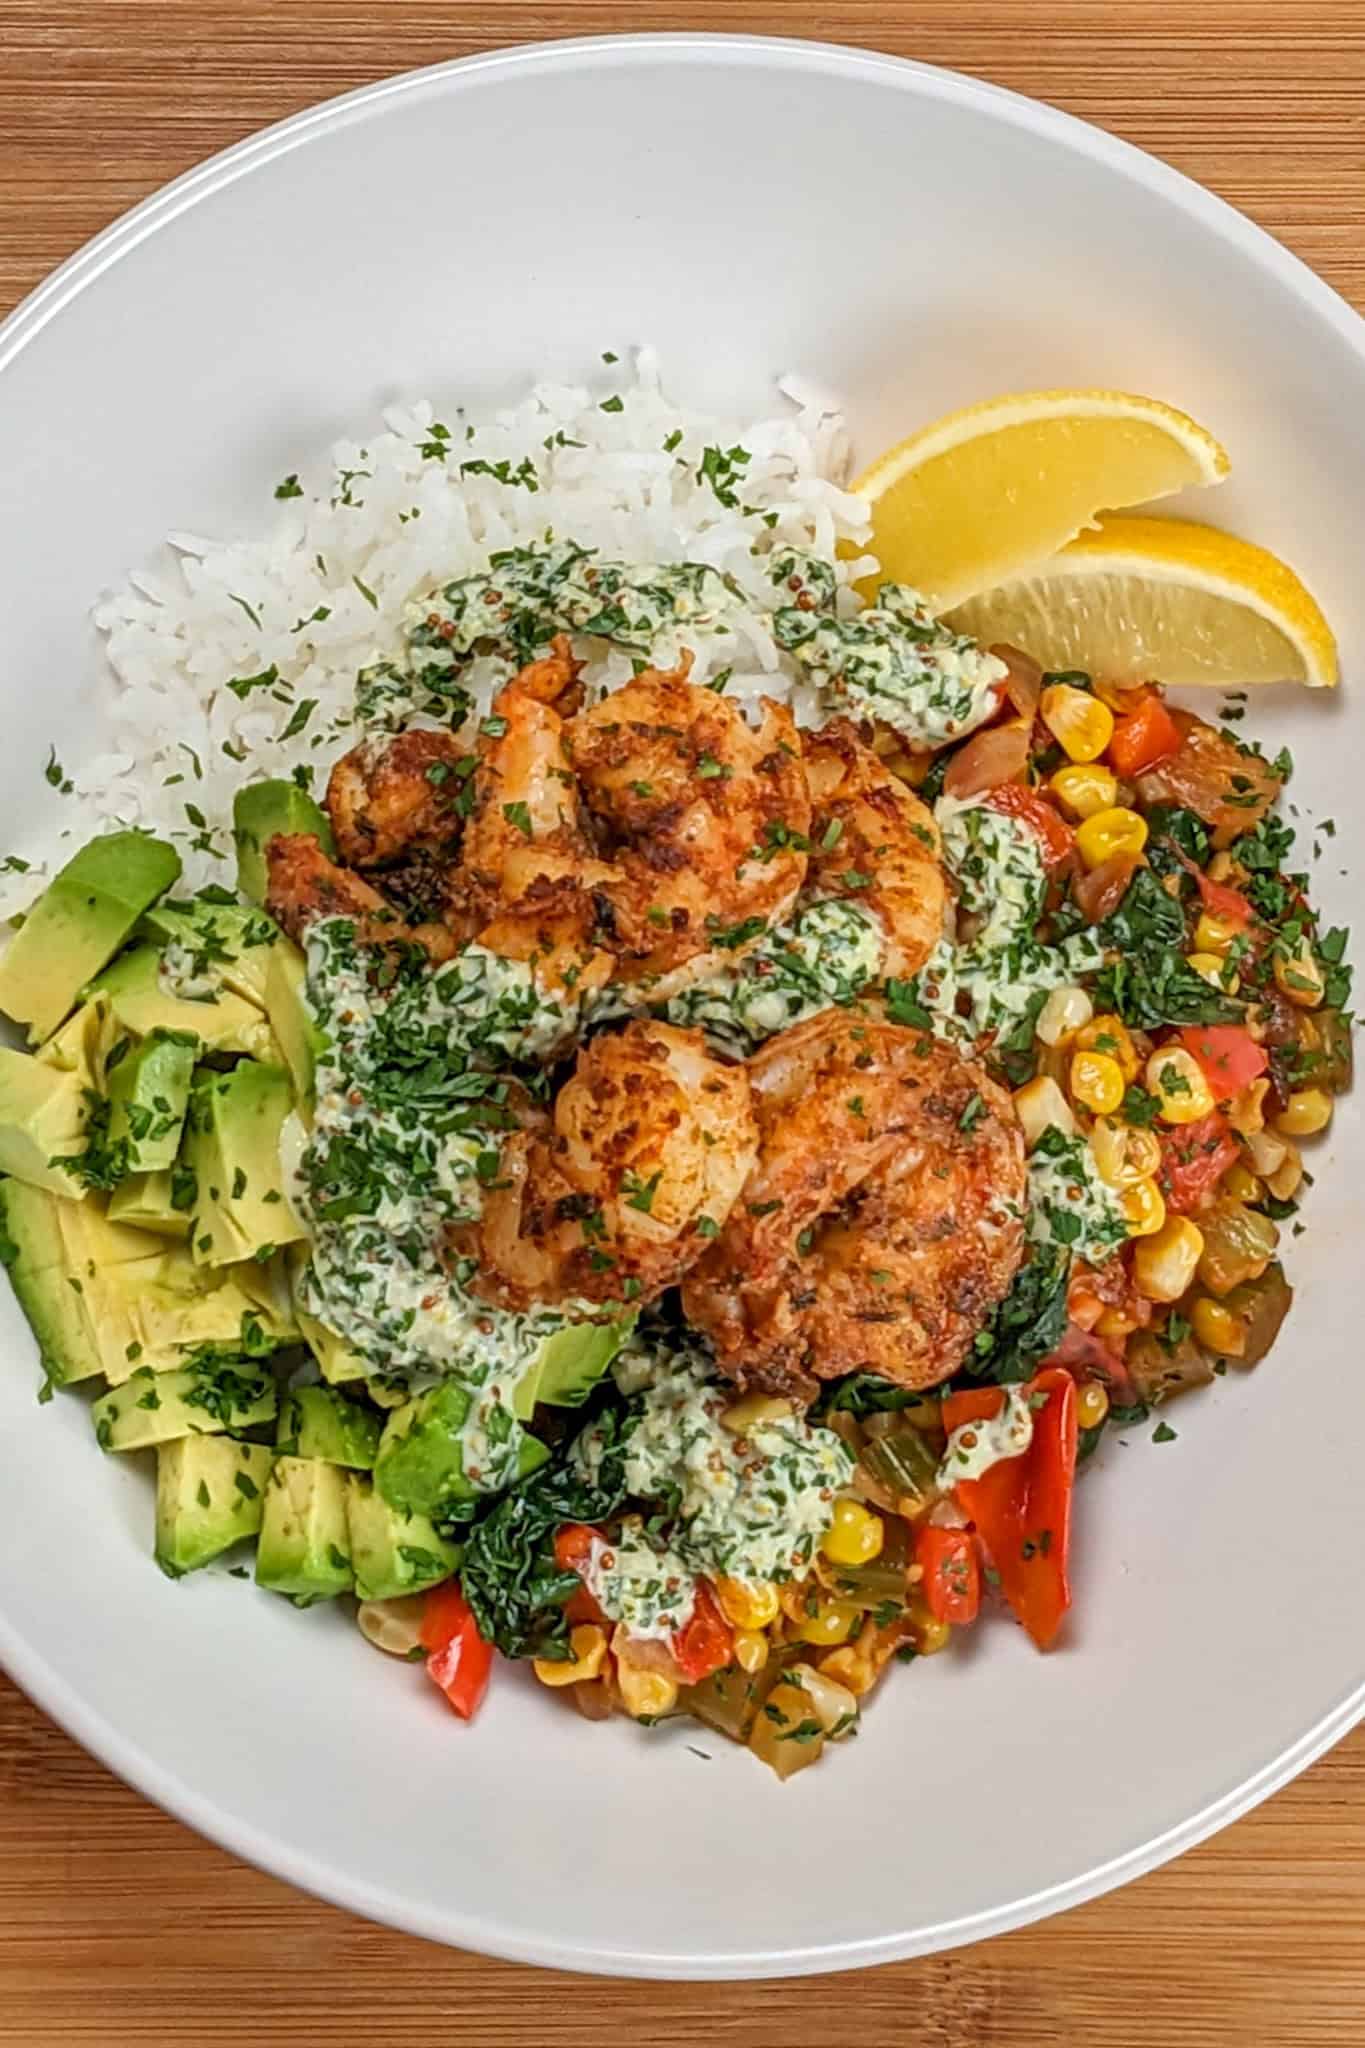 Top view of the Spicy Cajun Shrimp Rice Bowl with Lemon Remoulade in a wide rim bowl with diced avocado and lemon wedges.